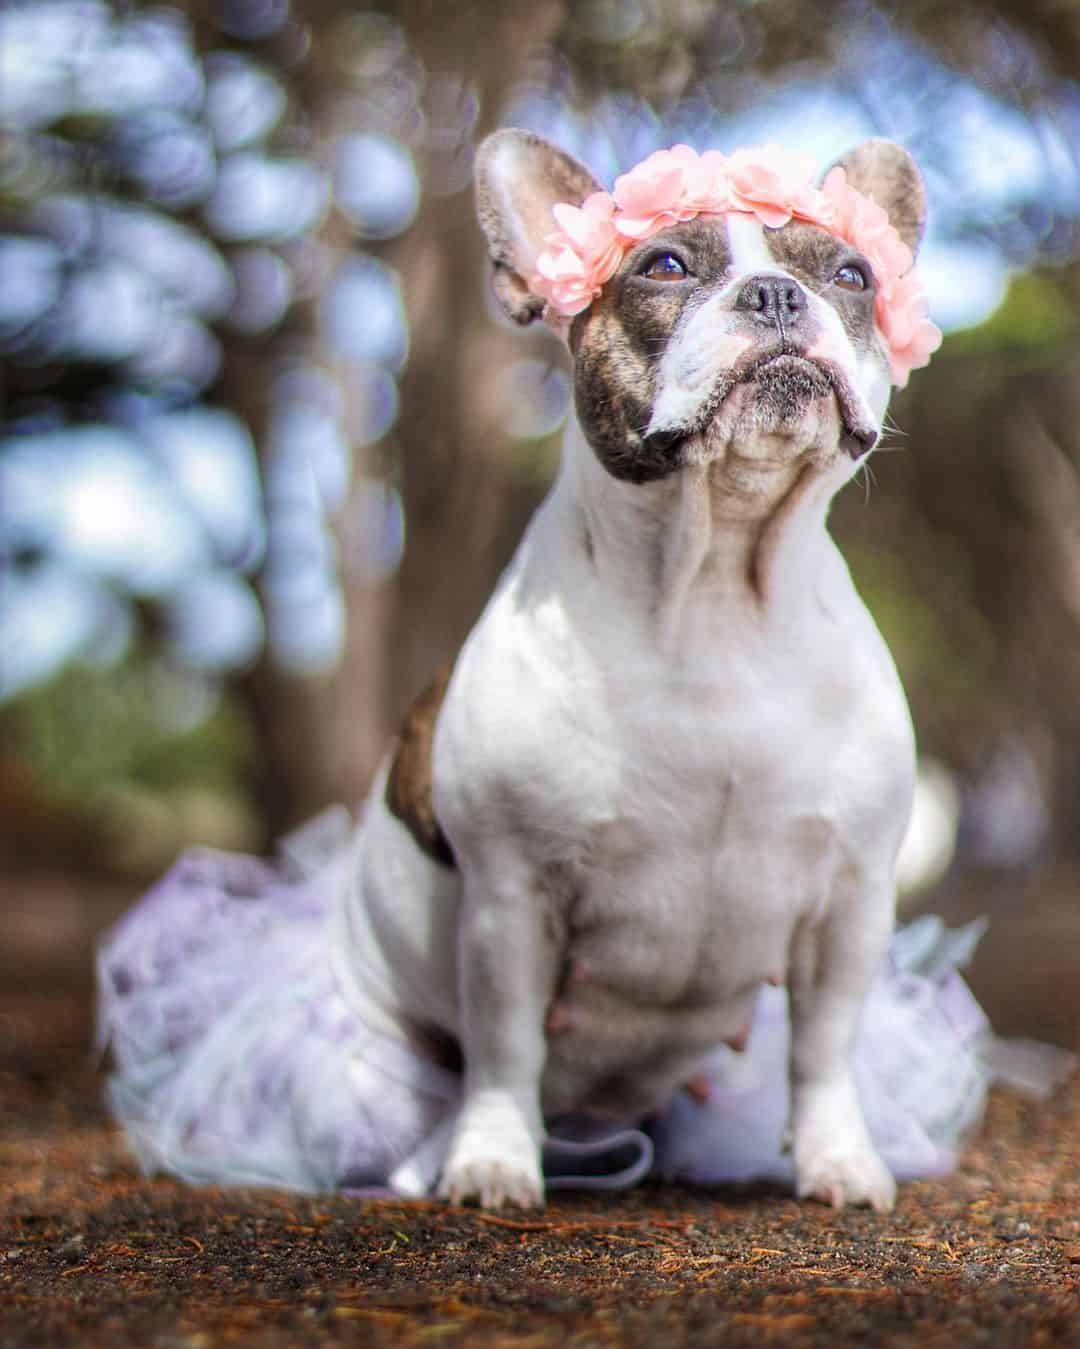 Kahuna's maternity photo with a flower crown